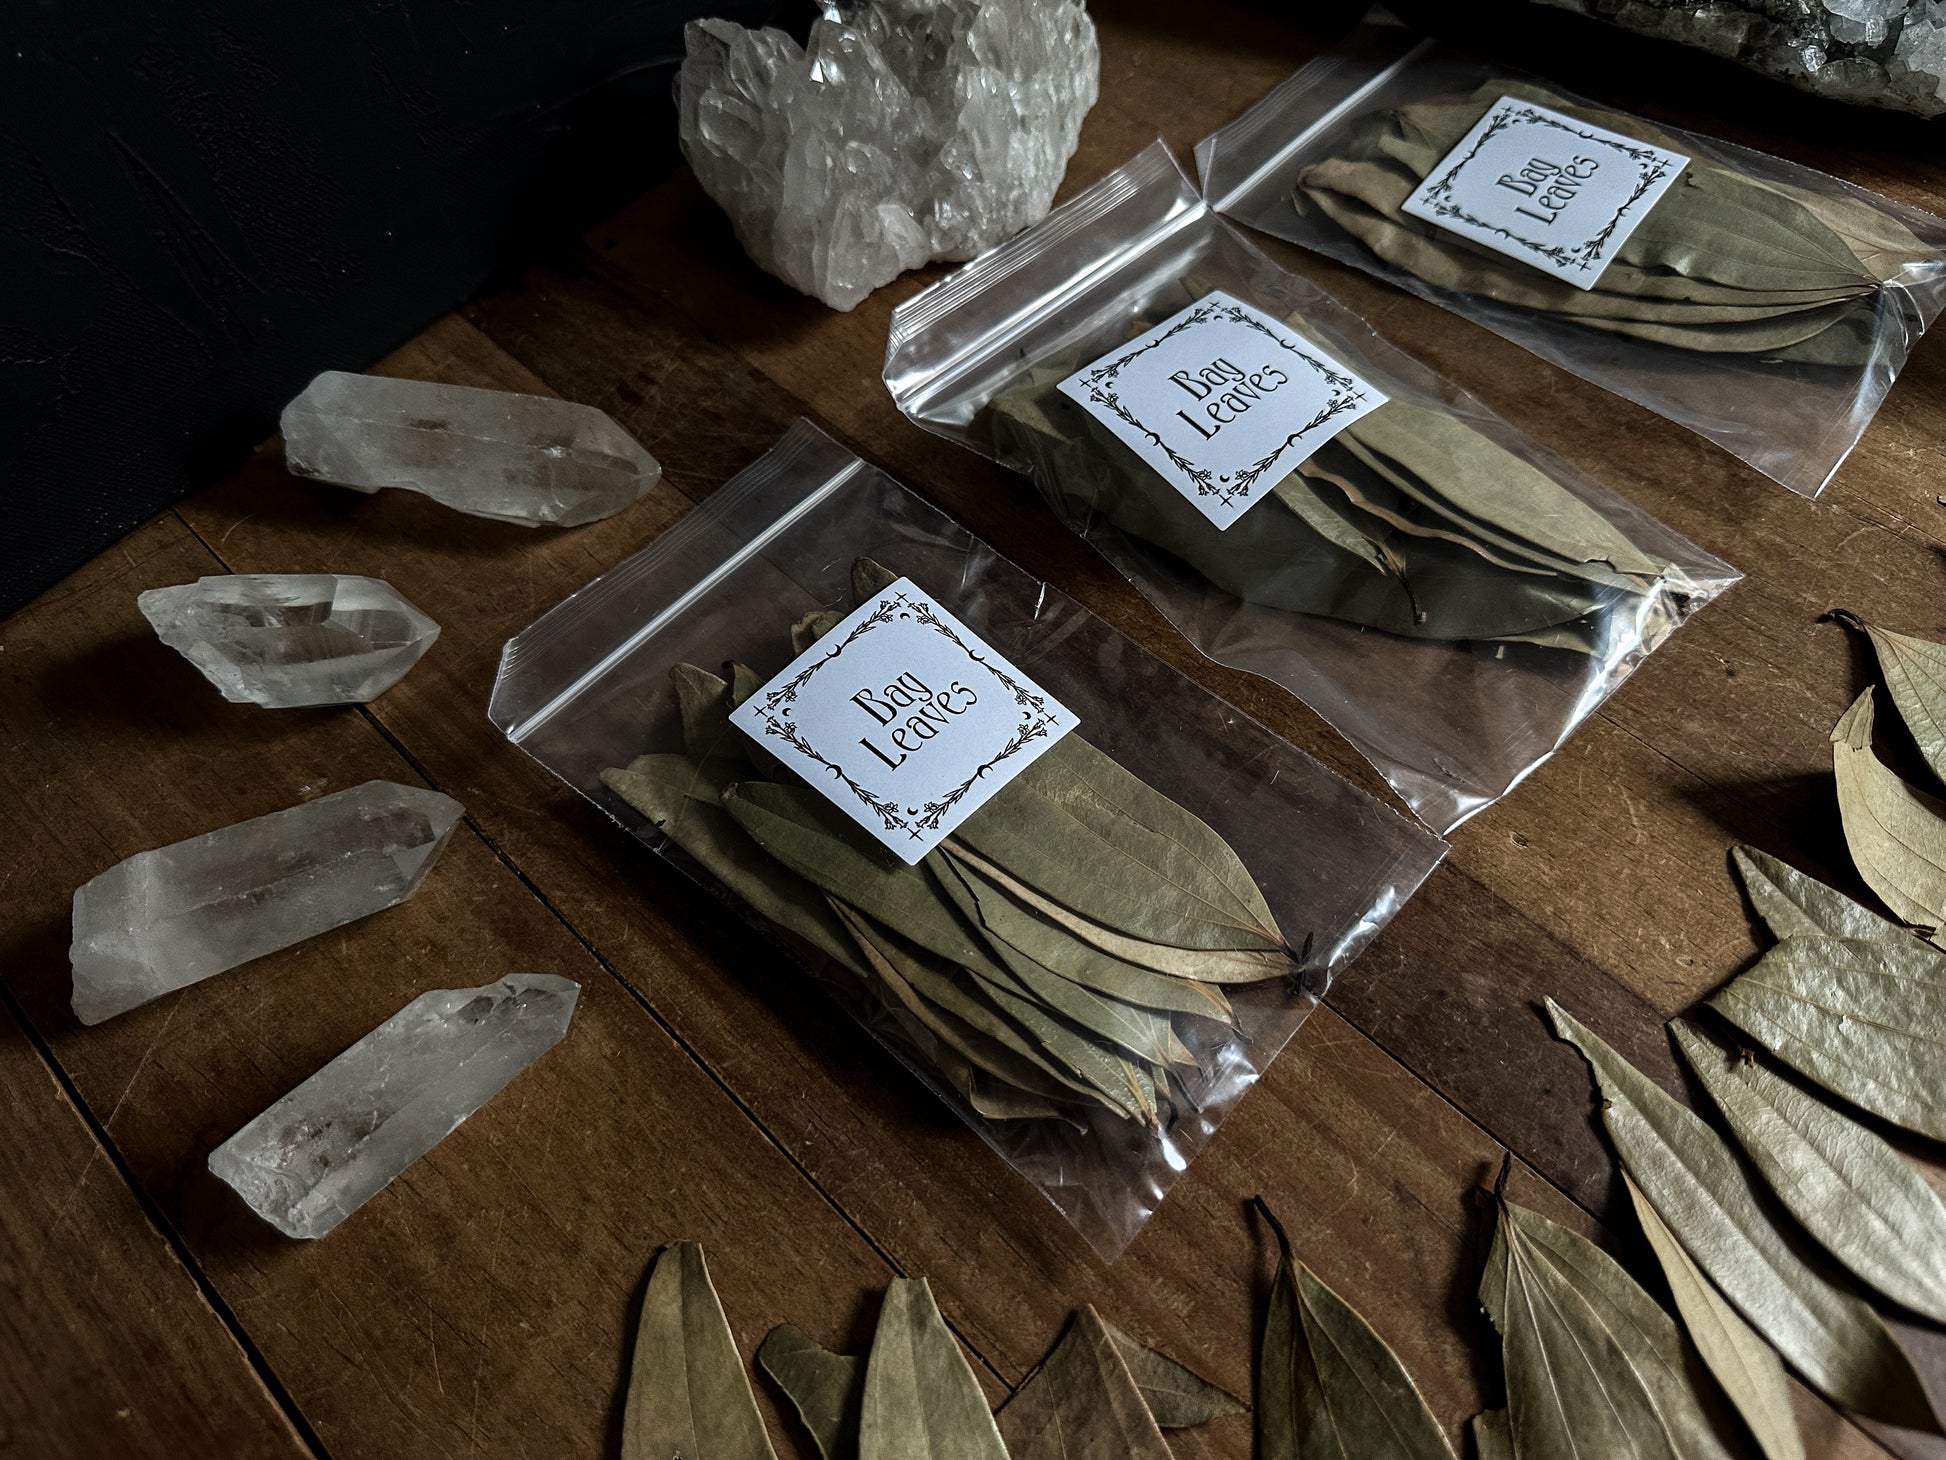 Among the various uses for Bay Leaves, our favourite application is for manifestation. This involves writing your desires or intentions onto the leaf and then burning it